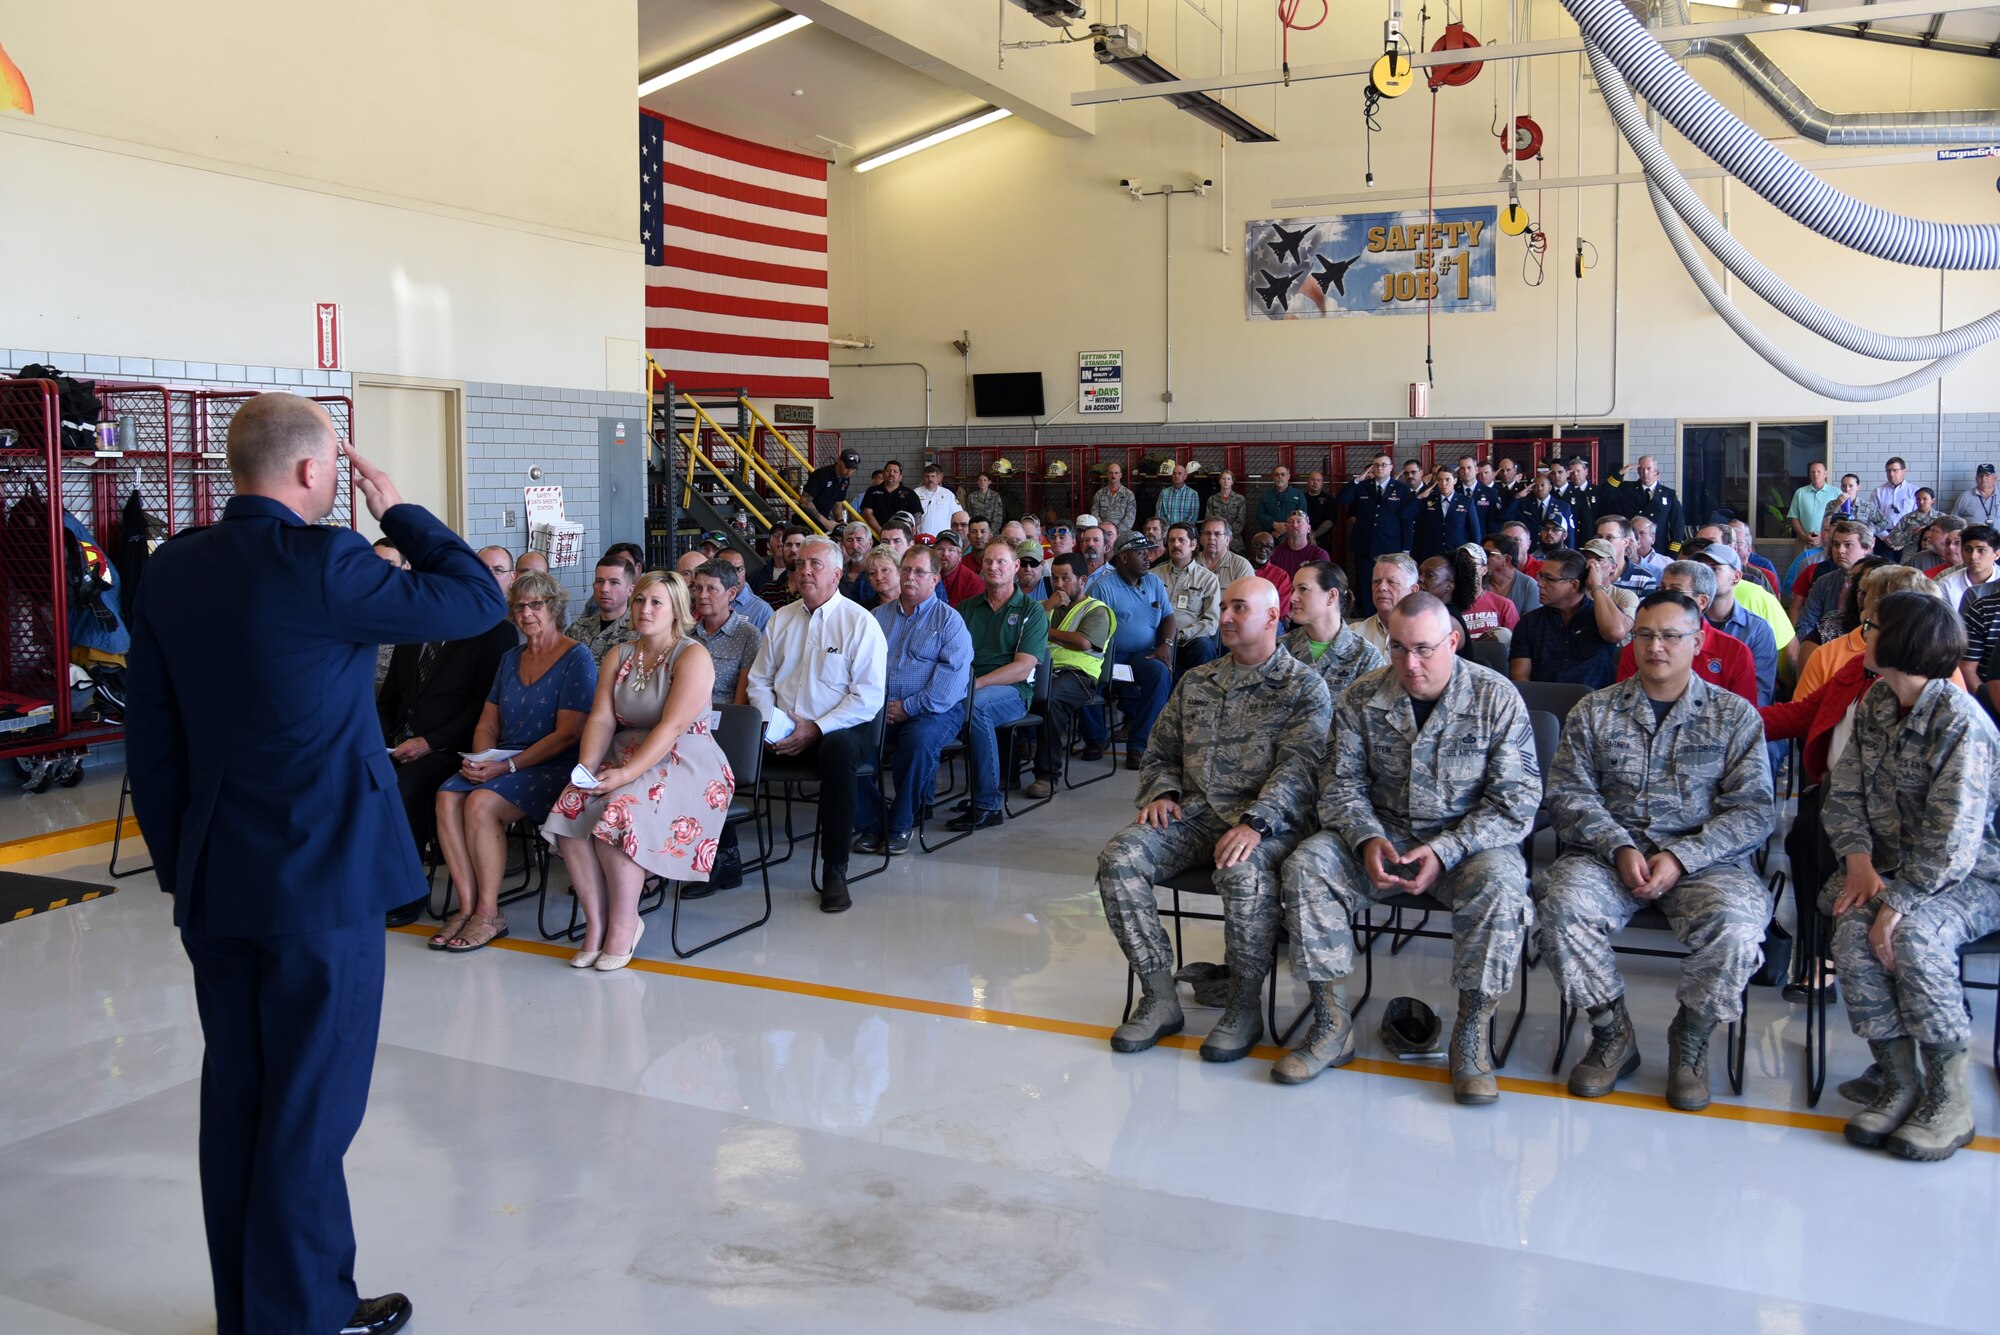 U.S. Air Force Maj. Nicholas Anderson, 17th Civil Engineer Squadron commander, salutes his squadron for the first time during the 17th CES Assumption of Command at the fire department on Goodfellow Air Force Base, Texas, June 22, 2018. The assumption of command ceremony provides an opportunity for members of the unit to see their new commander, and for the new commander to inspect his or her troops. (U.S. Air Force photo by Staff Sgt. Joshua Edwards/Released)